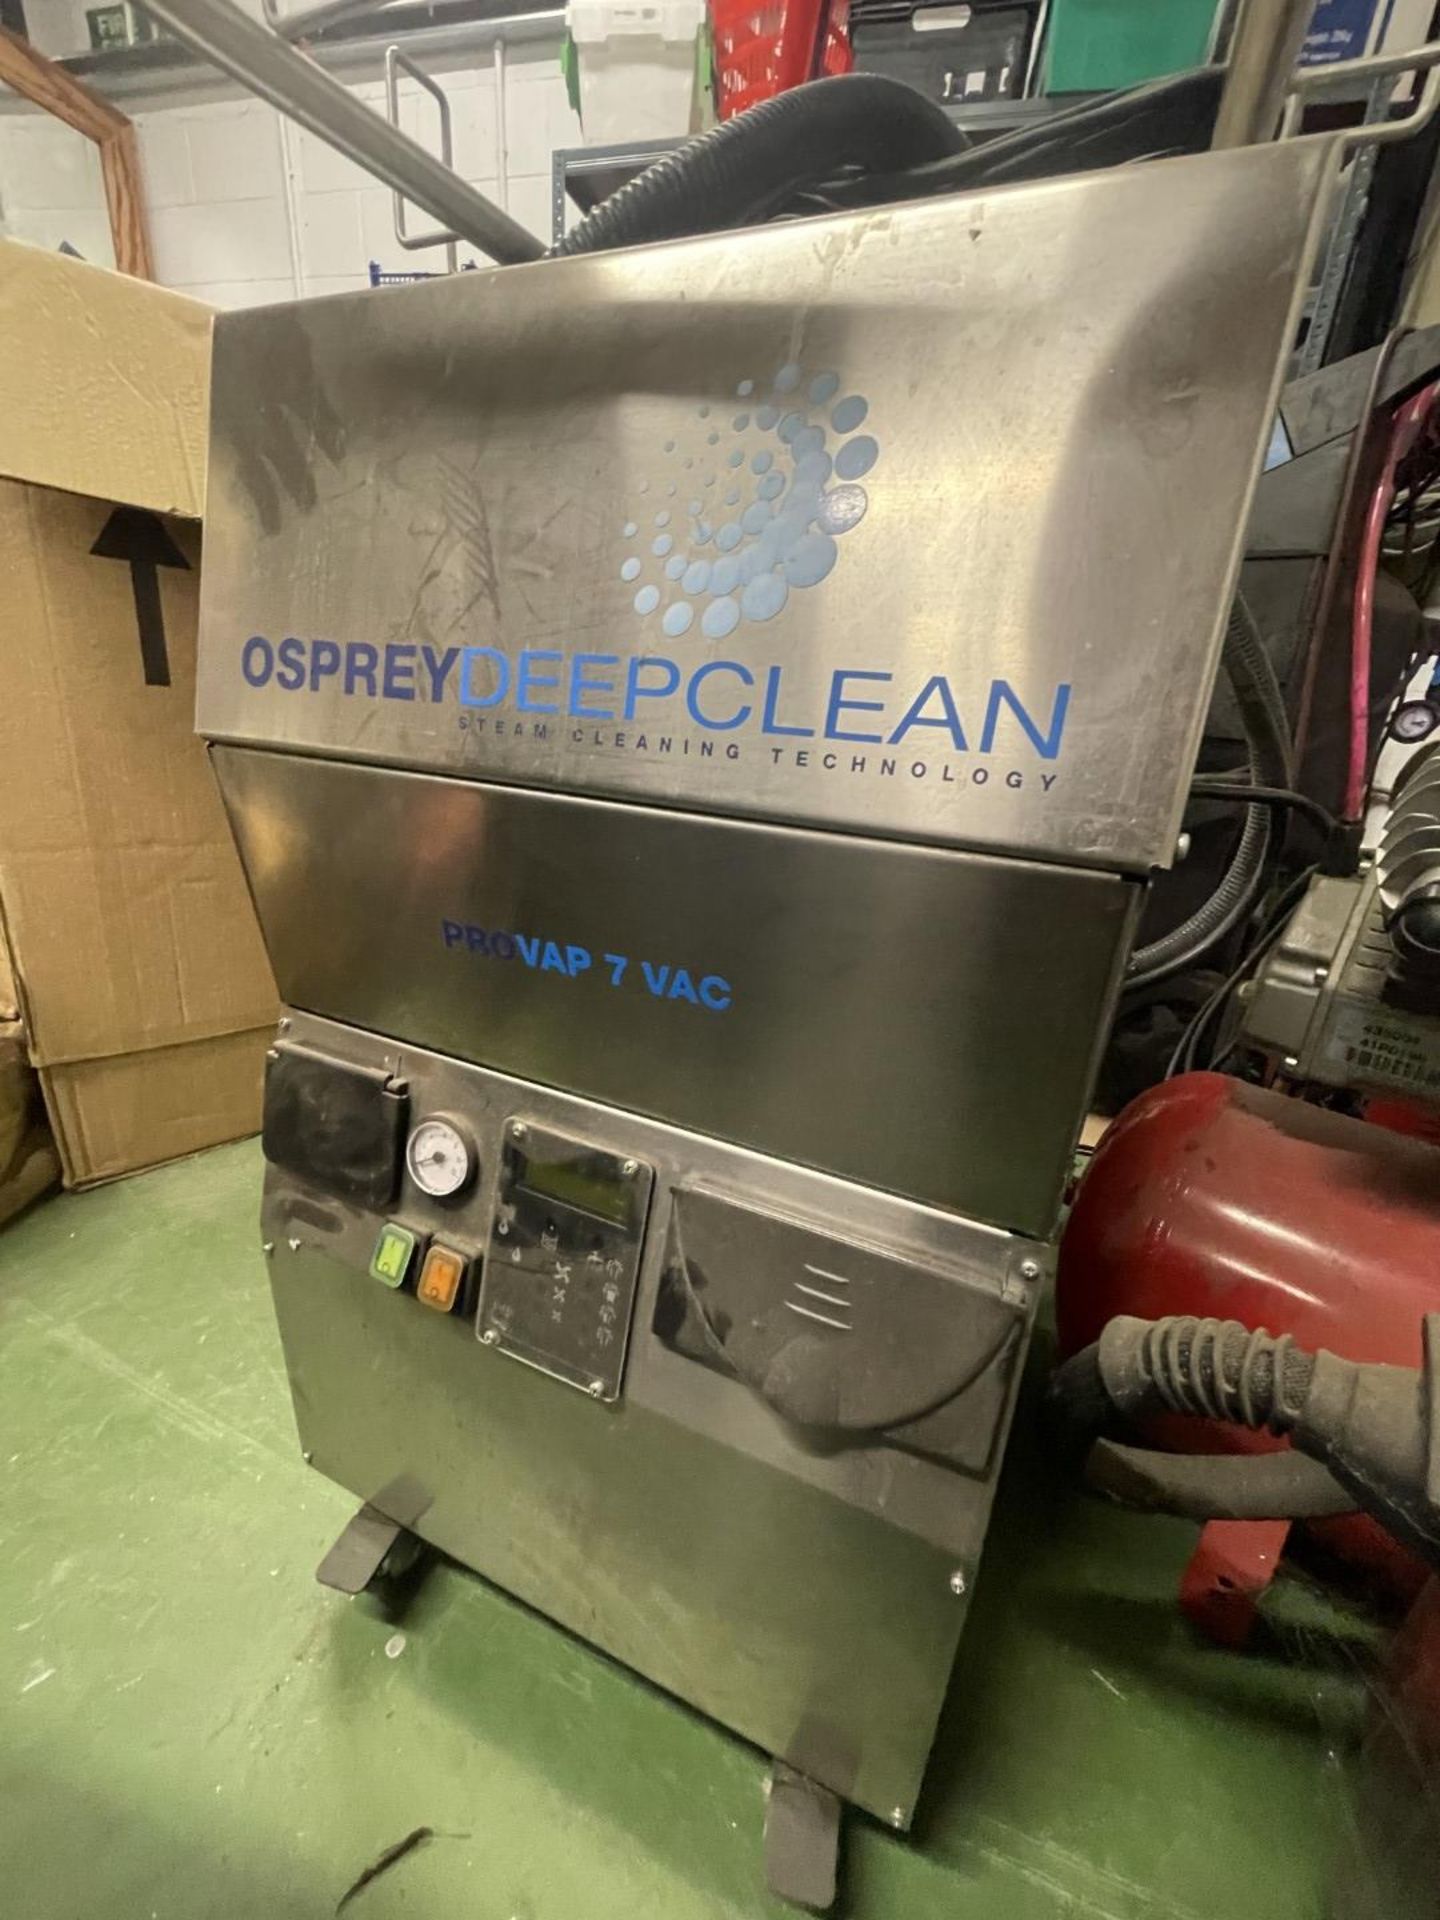 1 x Osprey Deep Clean Provap 7 VAC Steam Cleaner - Removed From a Working Environment - CL011 - Ref: - Image 8 of 9